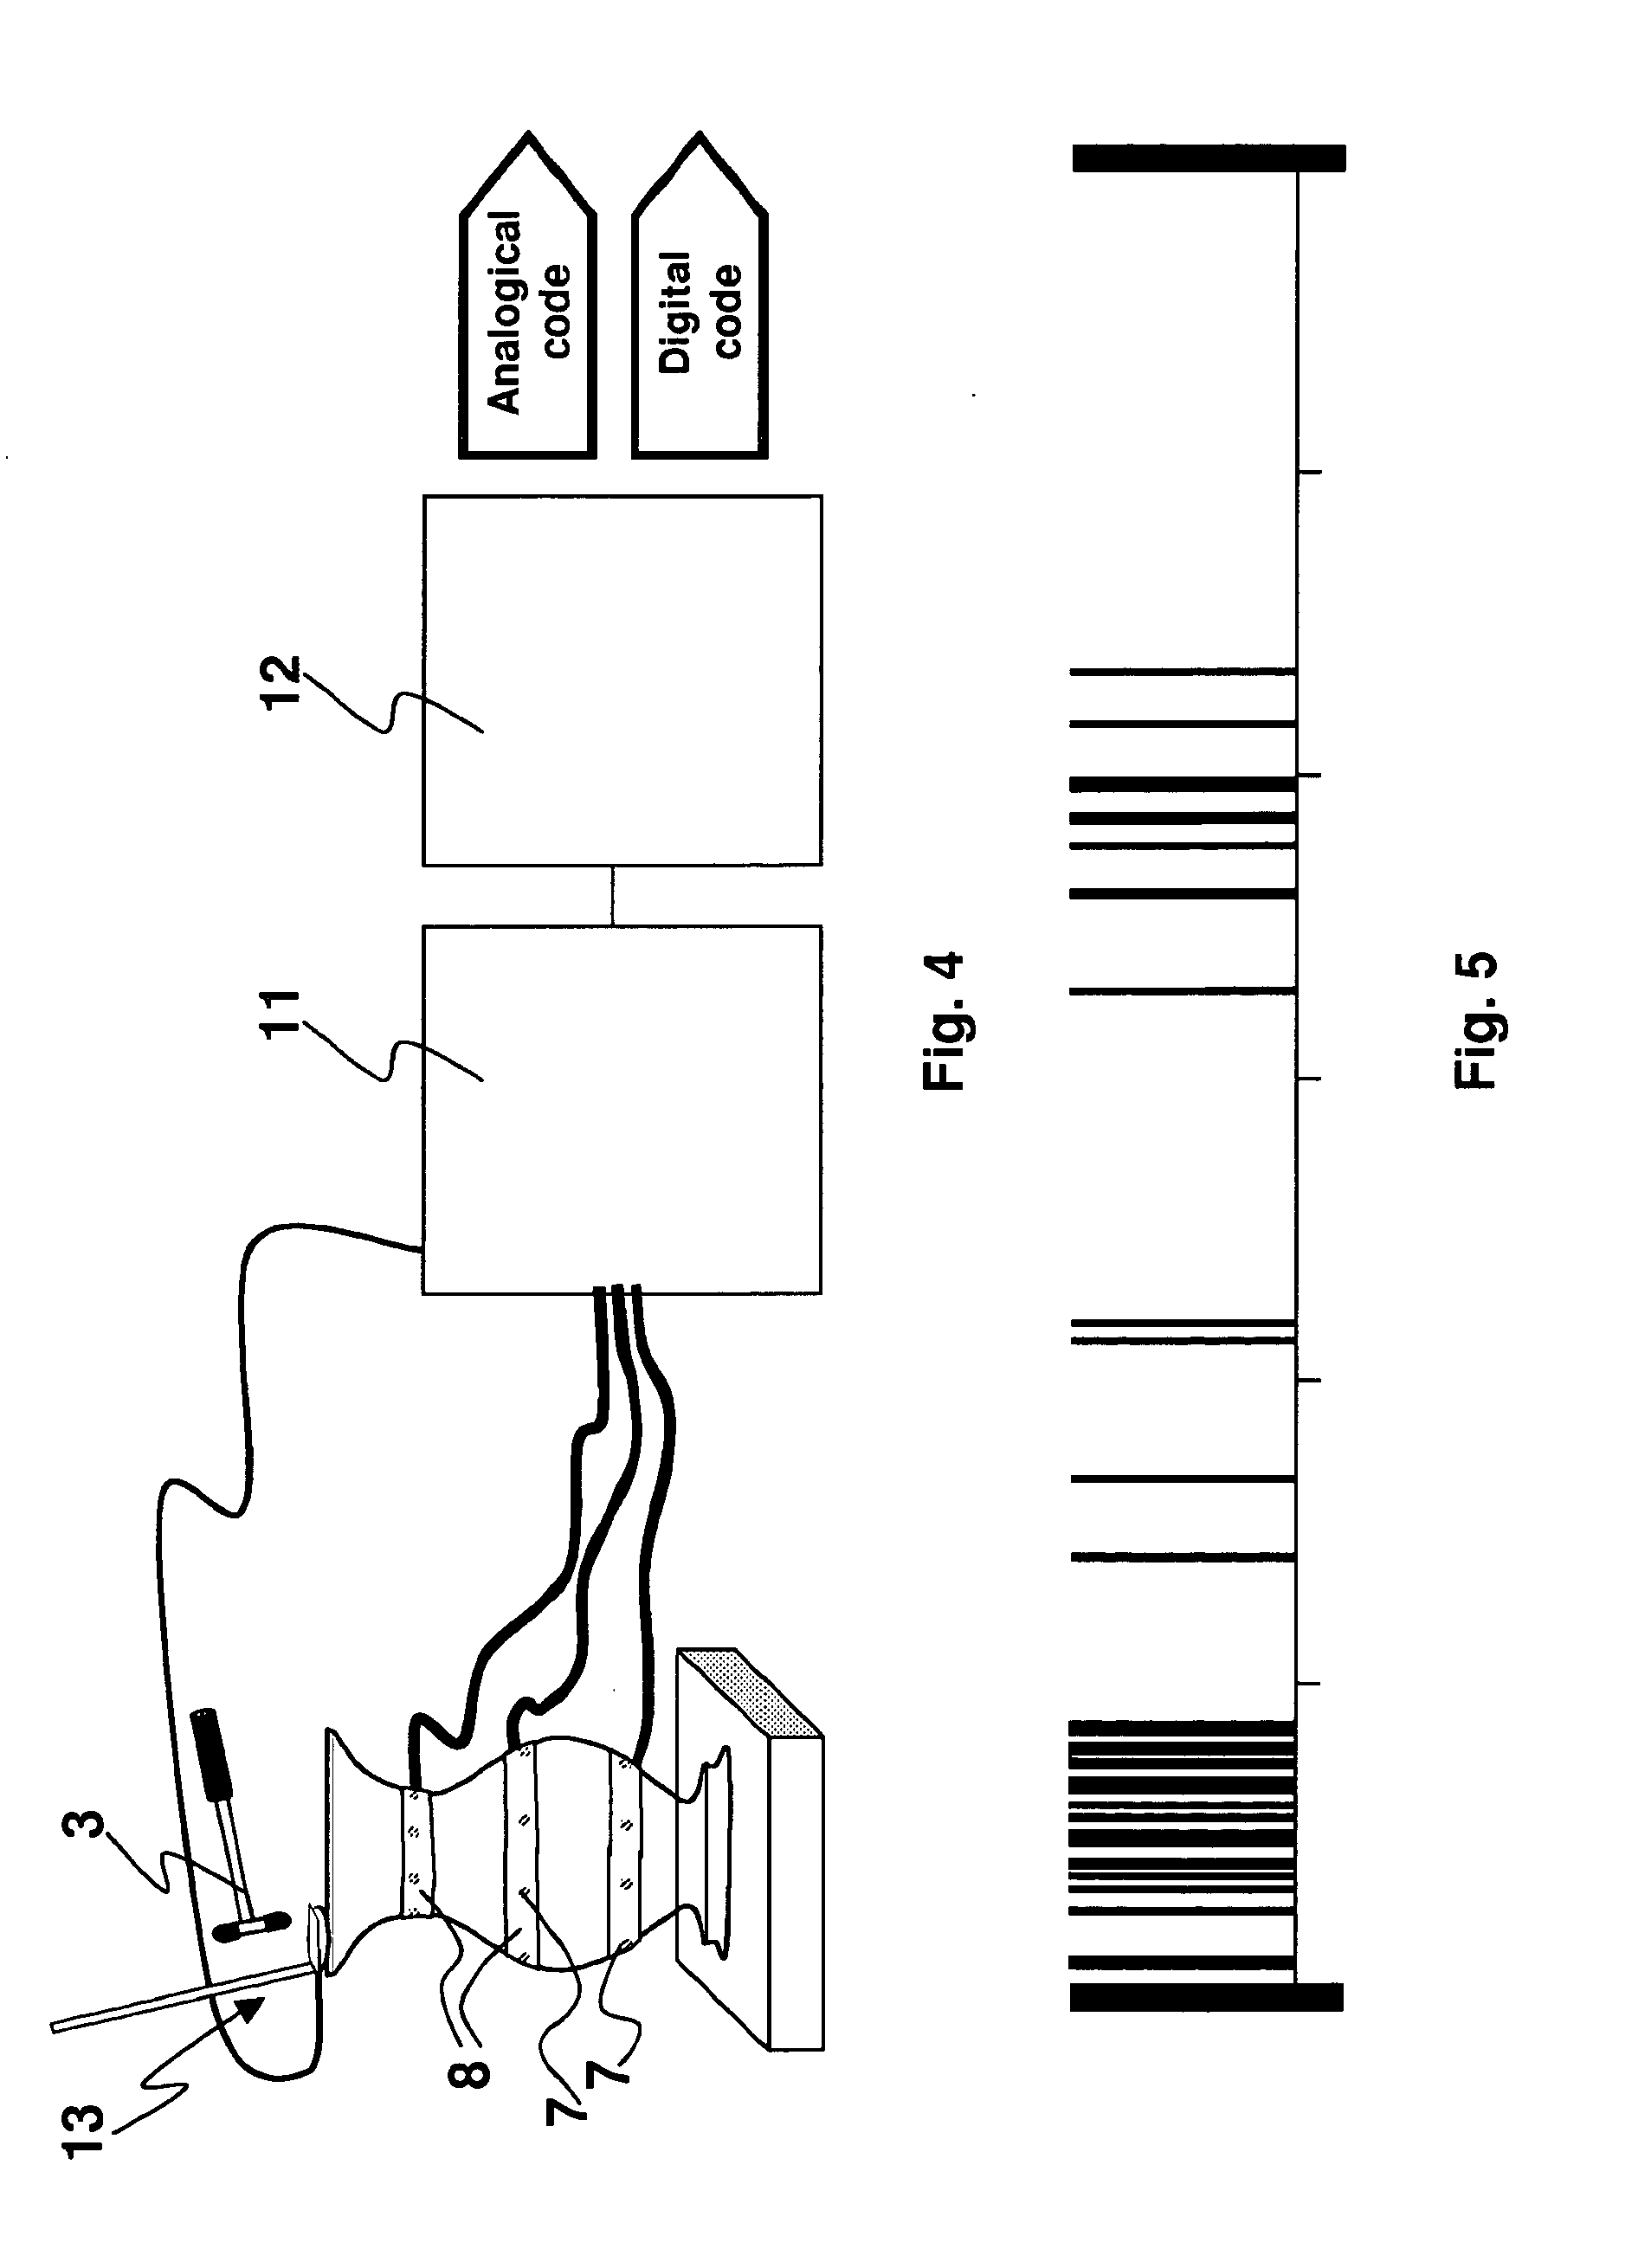 Method for detecting a sonic imprint of a three-dimensional object & related apparatus